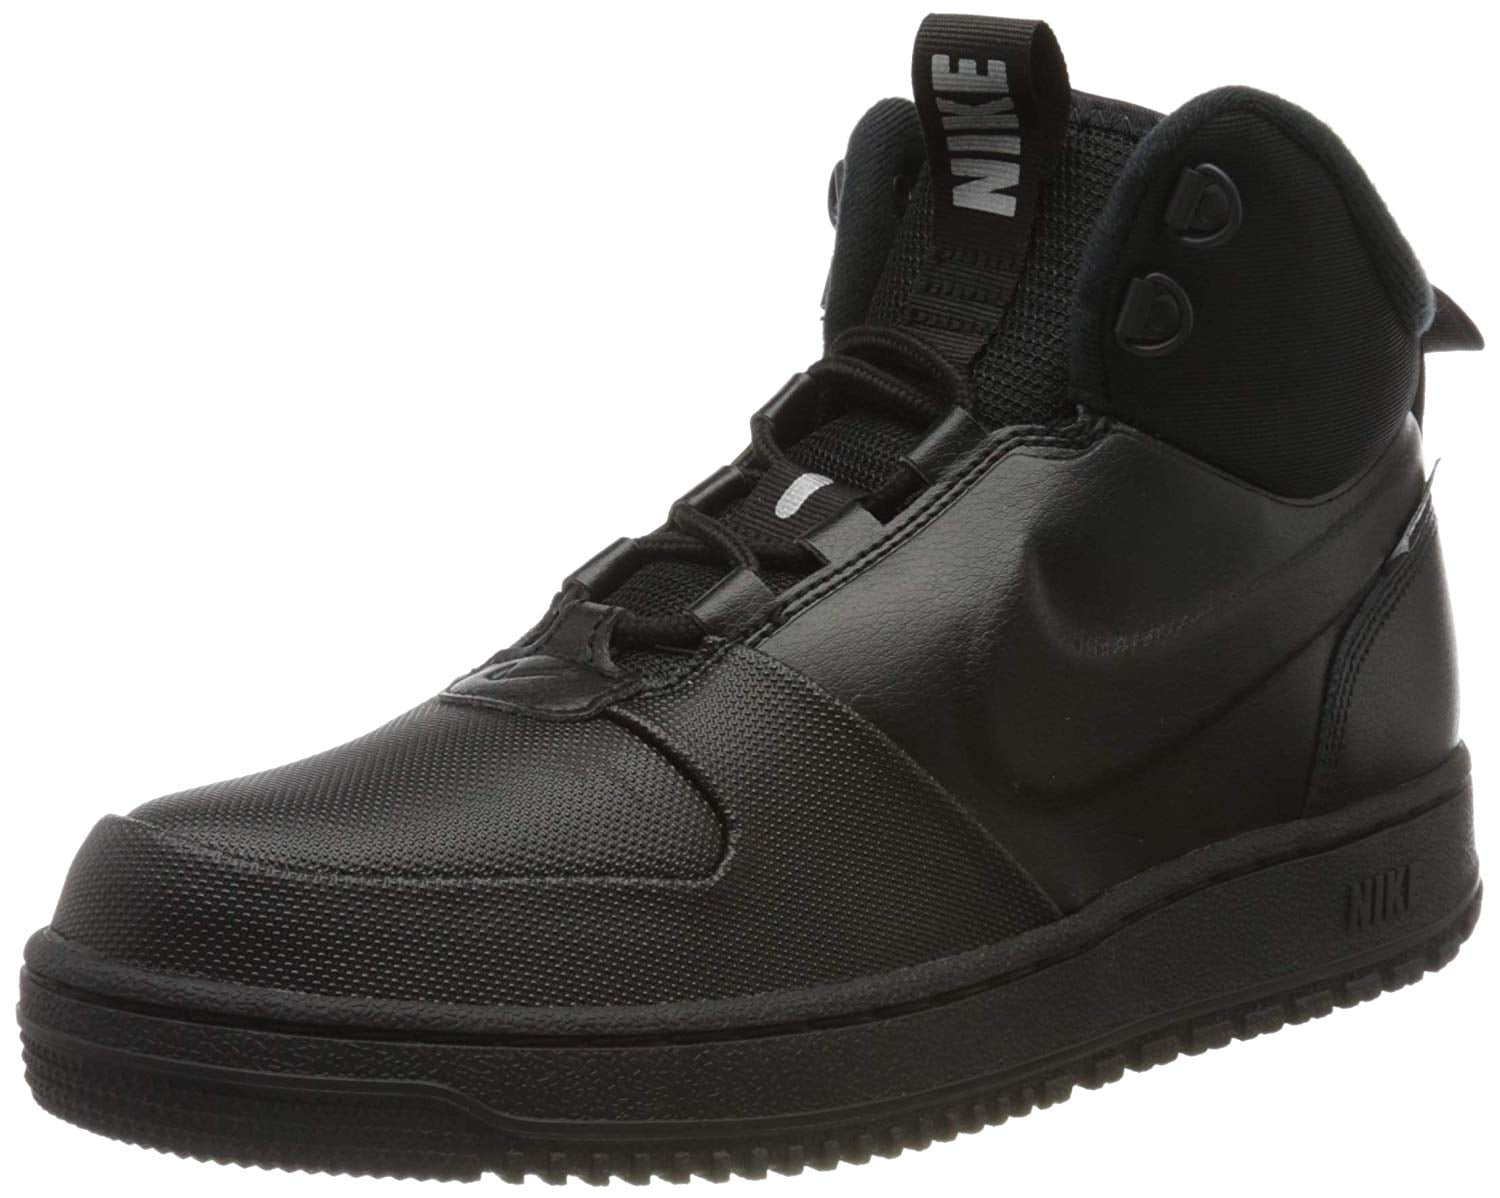 mens nike path winter boots